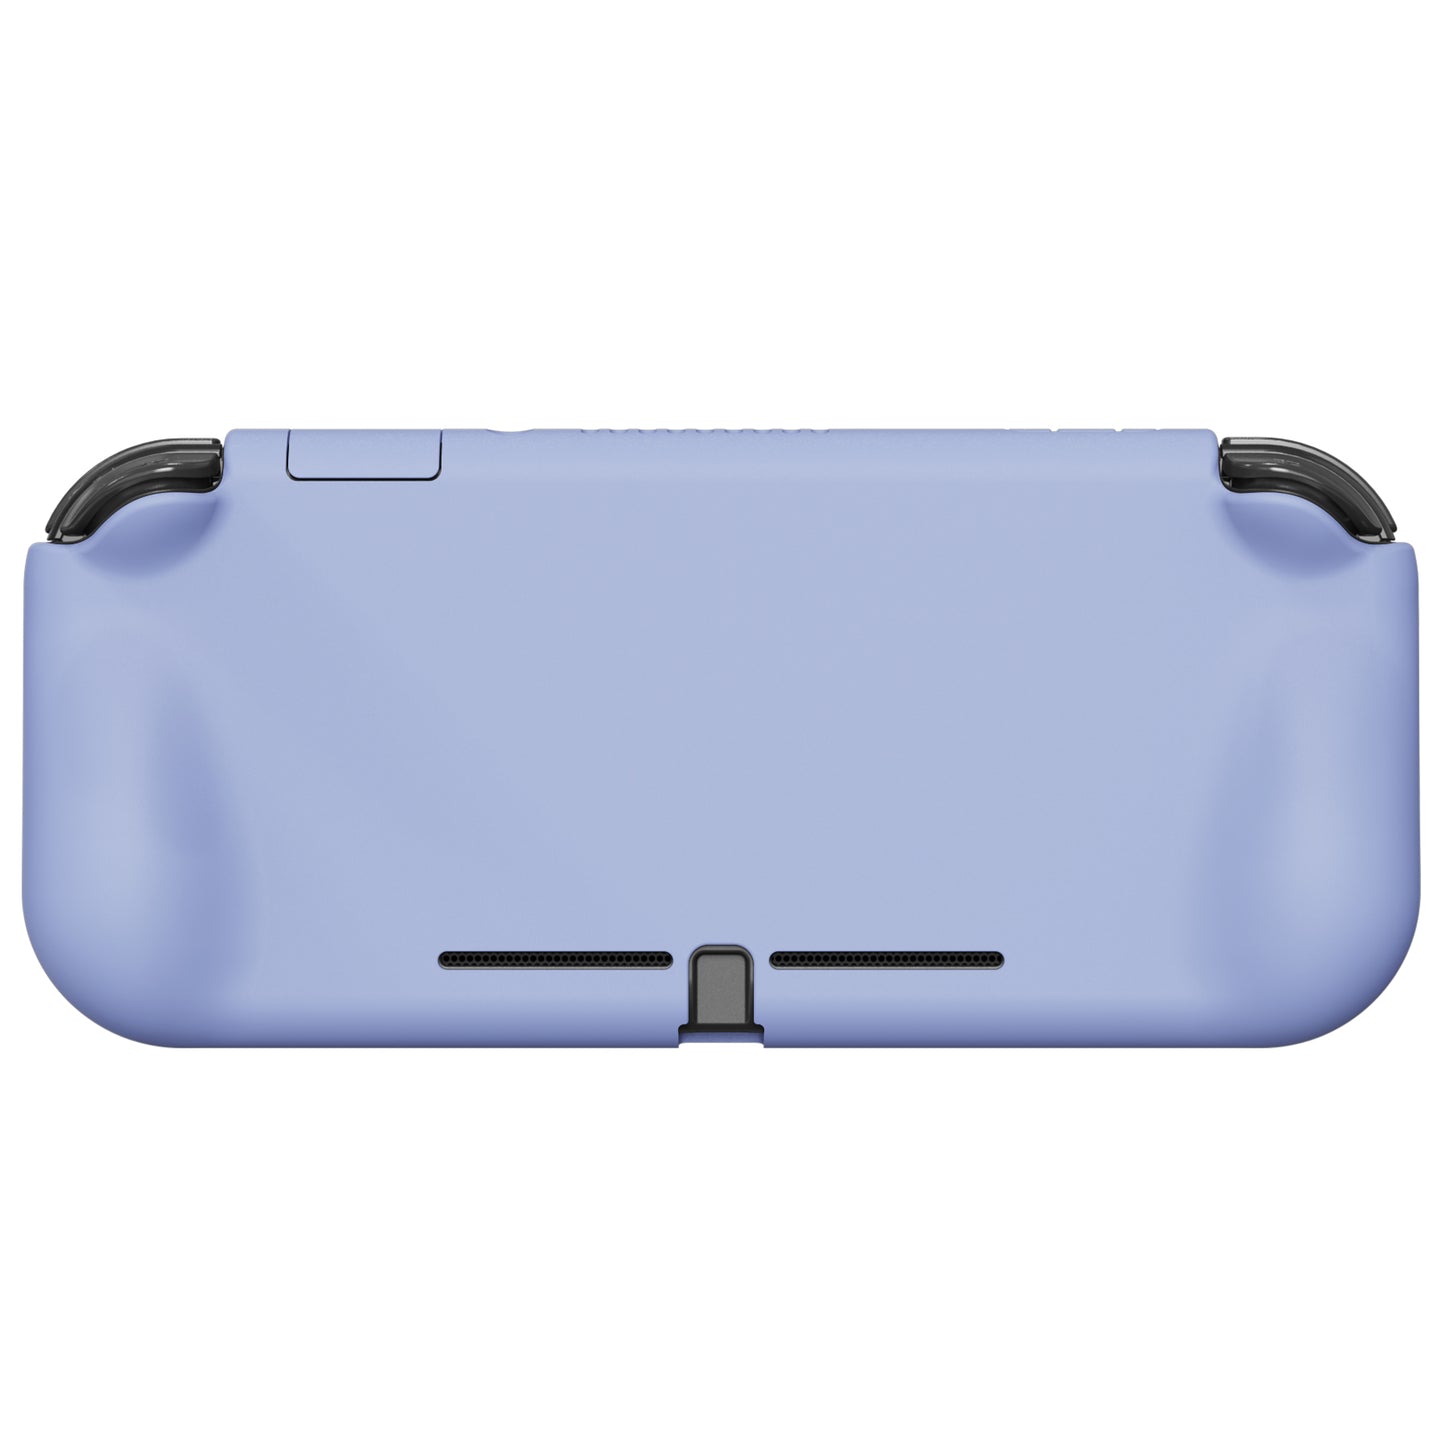 PlayVital ZealProtect Protective Case for Nintendo Switch Lite, Hard Shell Ergonomic Grip Cover for Nintendo Switch Lite w/Screen Protector & Thumb Grip Caps & Button Caps - Light Violet - PSLYP3004 playvital